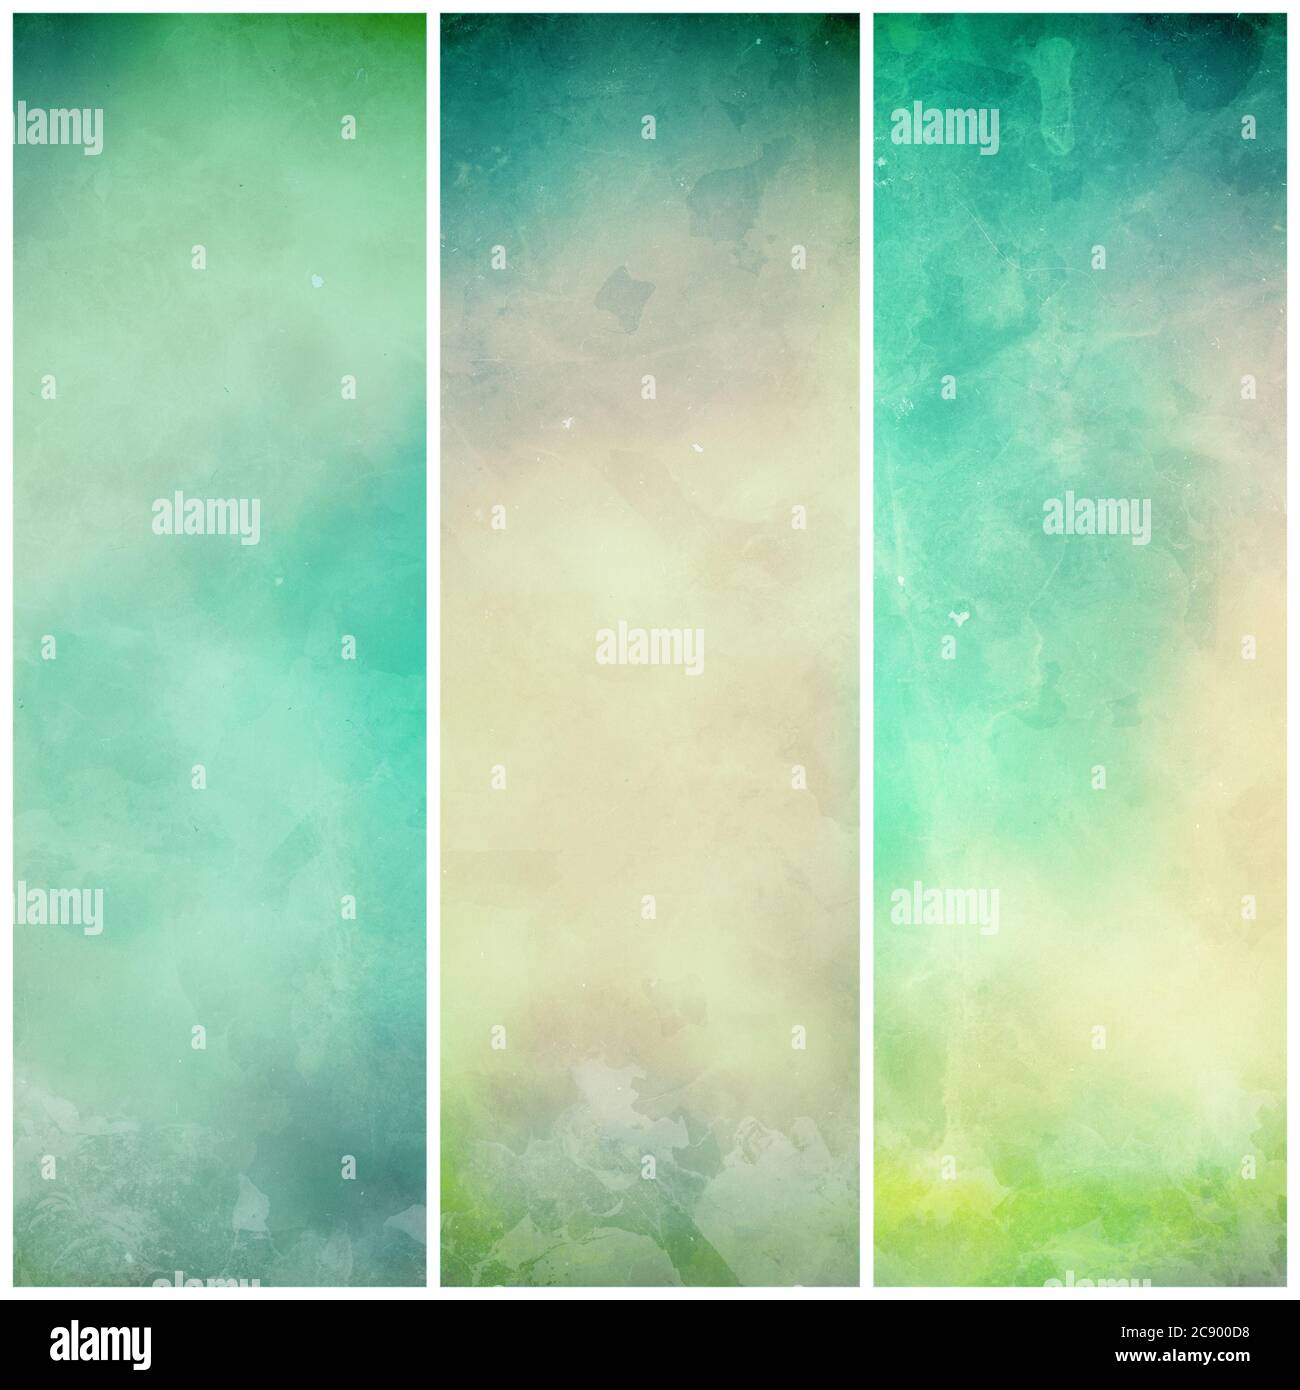 abstract green background banners or striped designs in soft mottled white and beige watercolor grunge texture stains and blue green colors Stock Photo